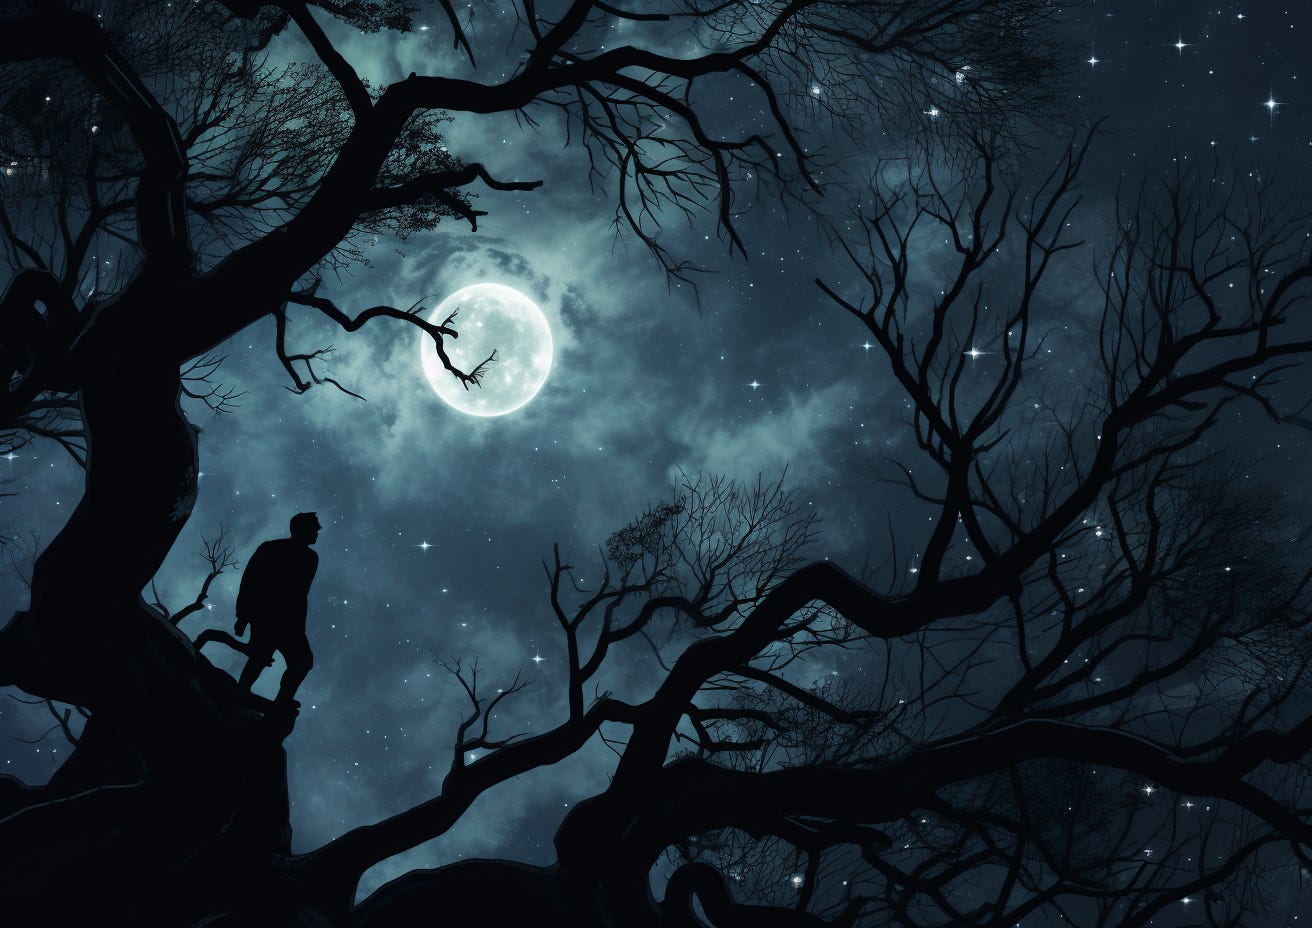 A man high in a tree contemplates the moon at night